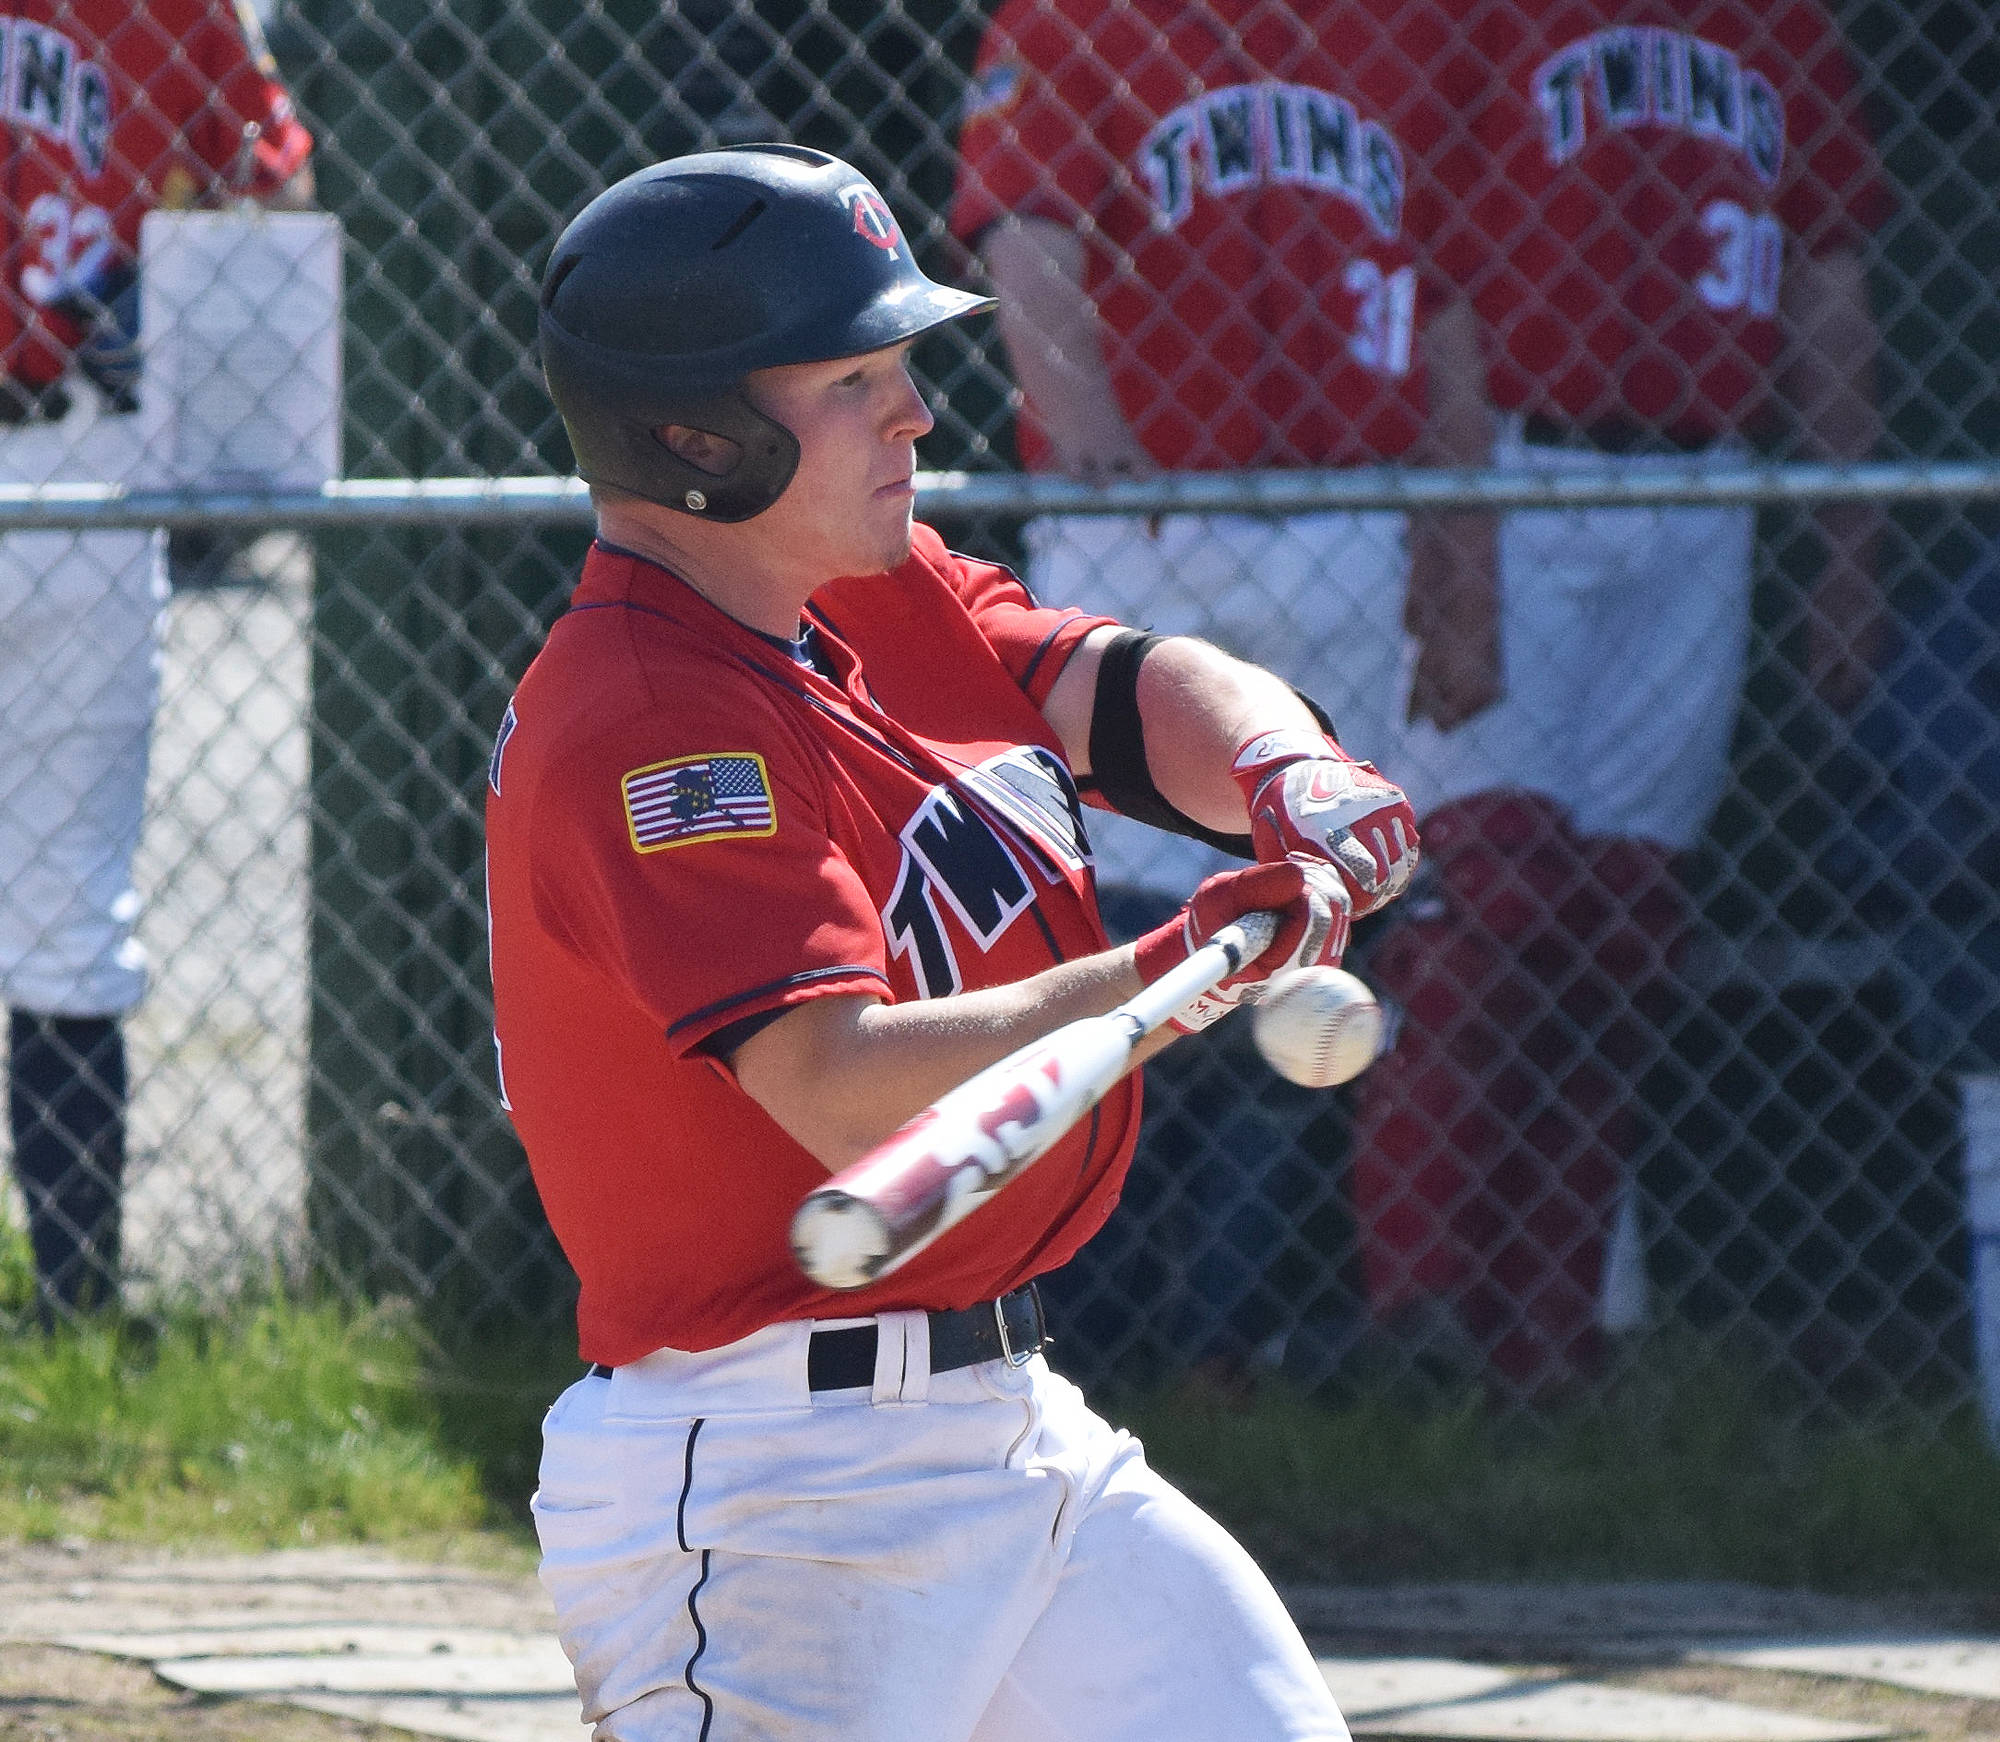 Twins batter Paul Steffensen takes a swing at a pitch by Bartlett Bears starter Taylor McCort on June 7 in an American Legion contest at the Kenai Little League fields. (Photo by Joey Klecka/Peninsula Clarion)